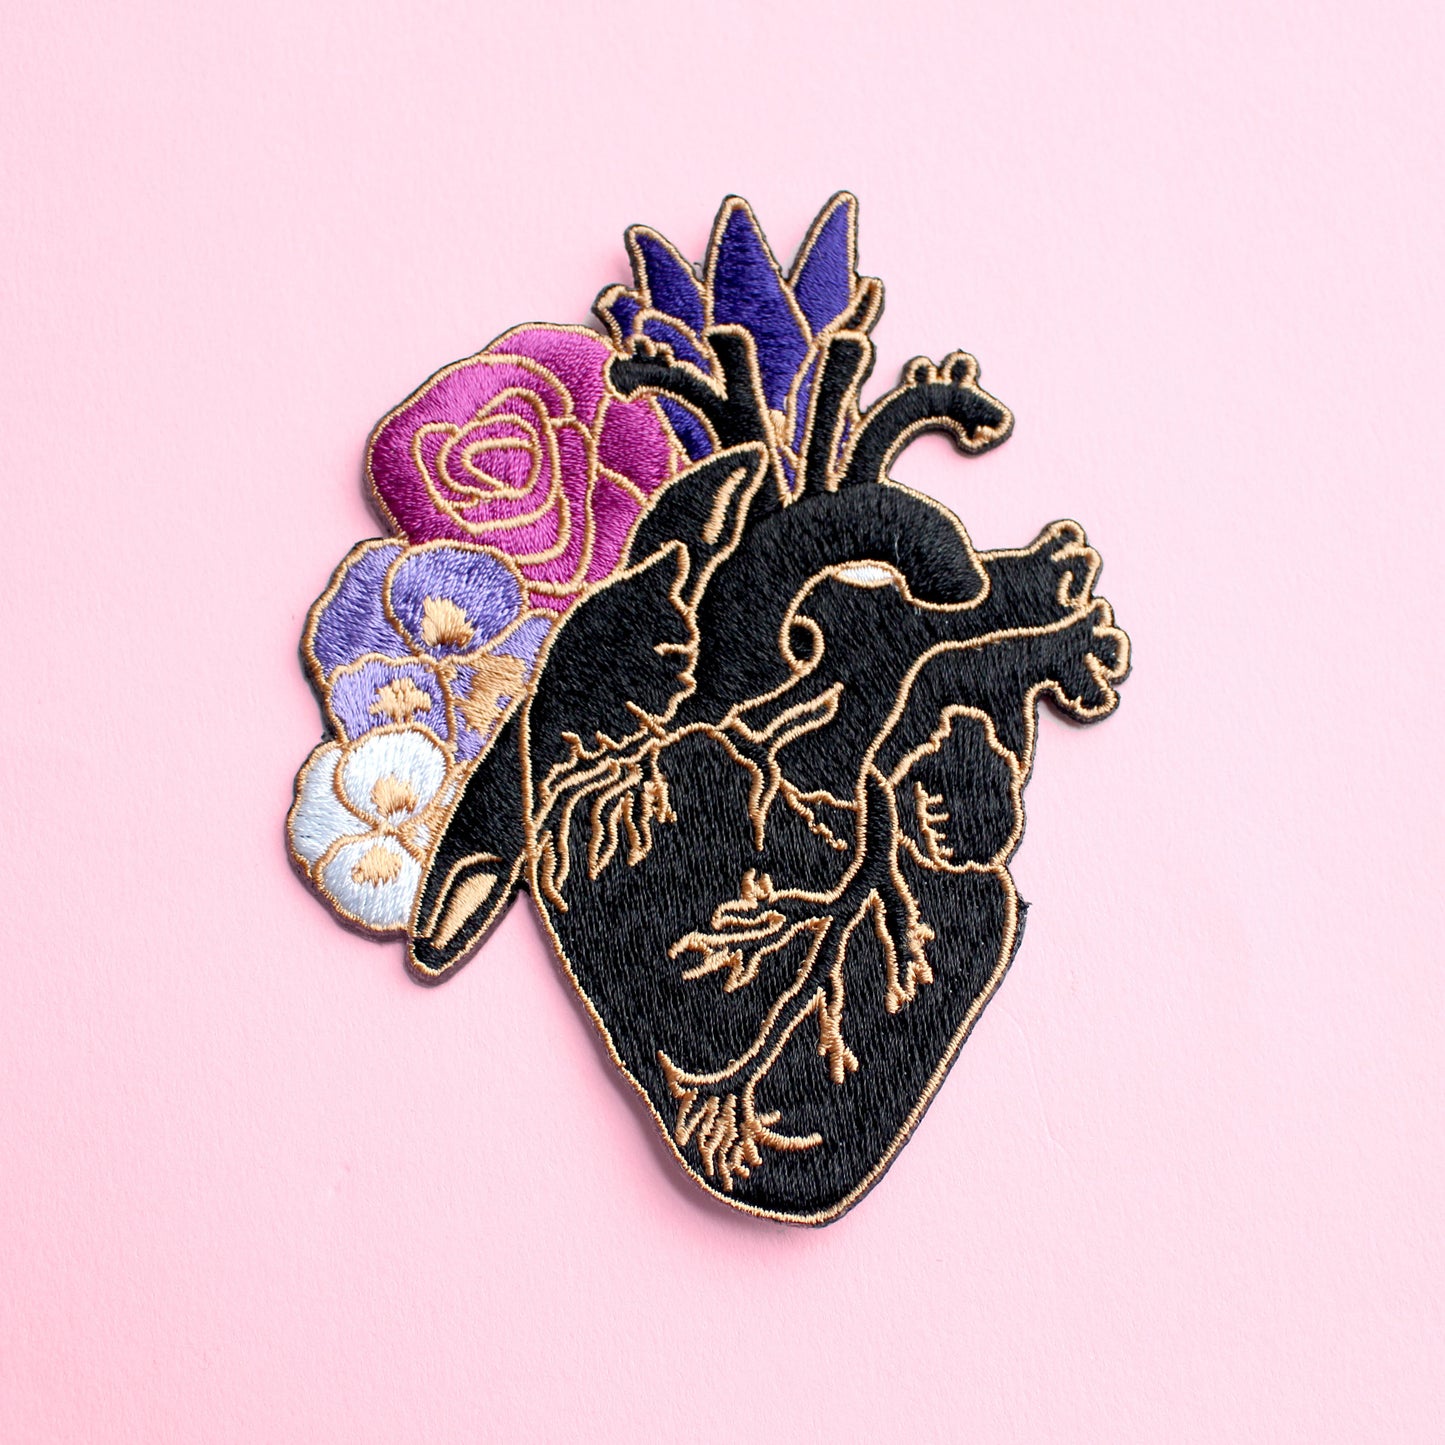 Anatomical Heart Iron-on patch